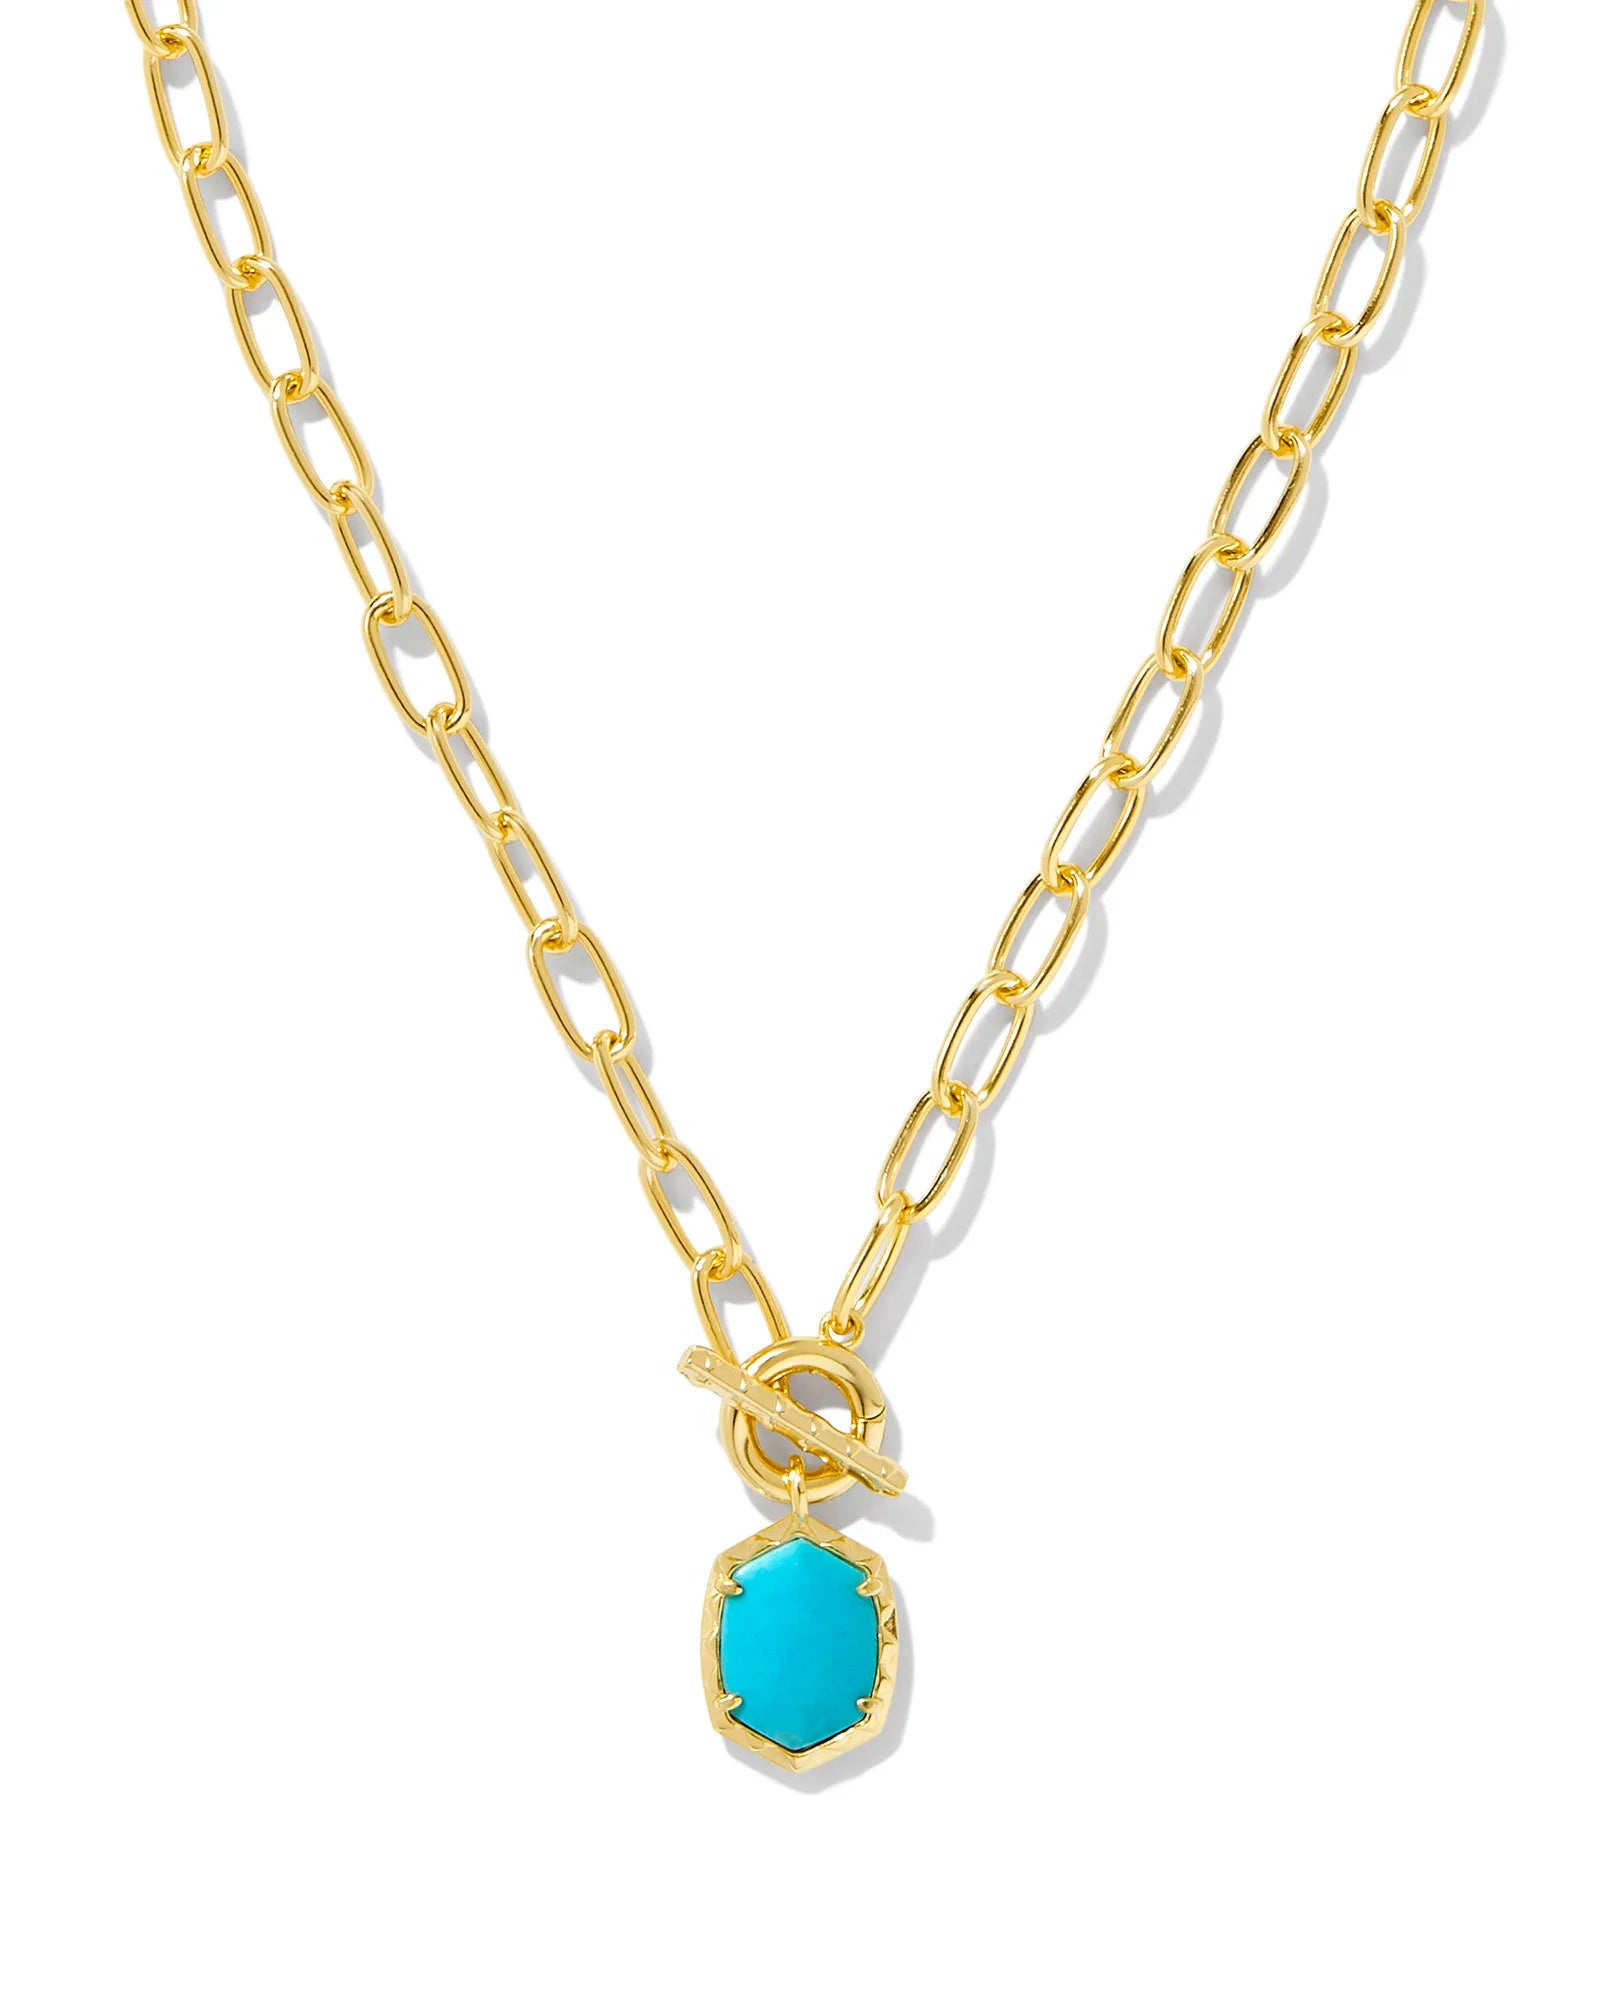 Kendra Scott Daphne Convertible Gold Link and Chain Necklace - Variegated Turquoise Magnesite